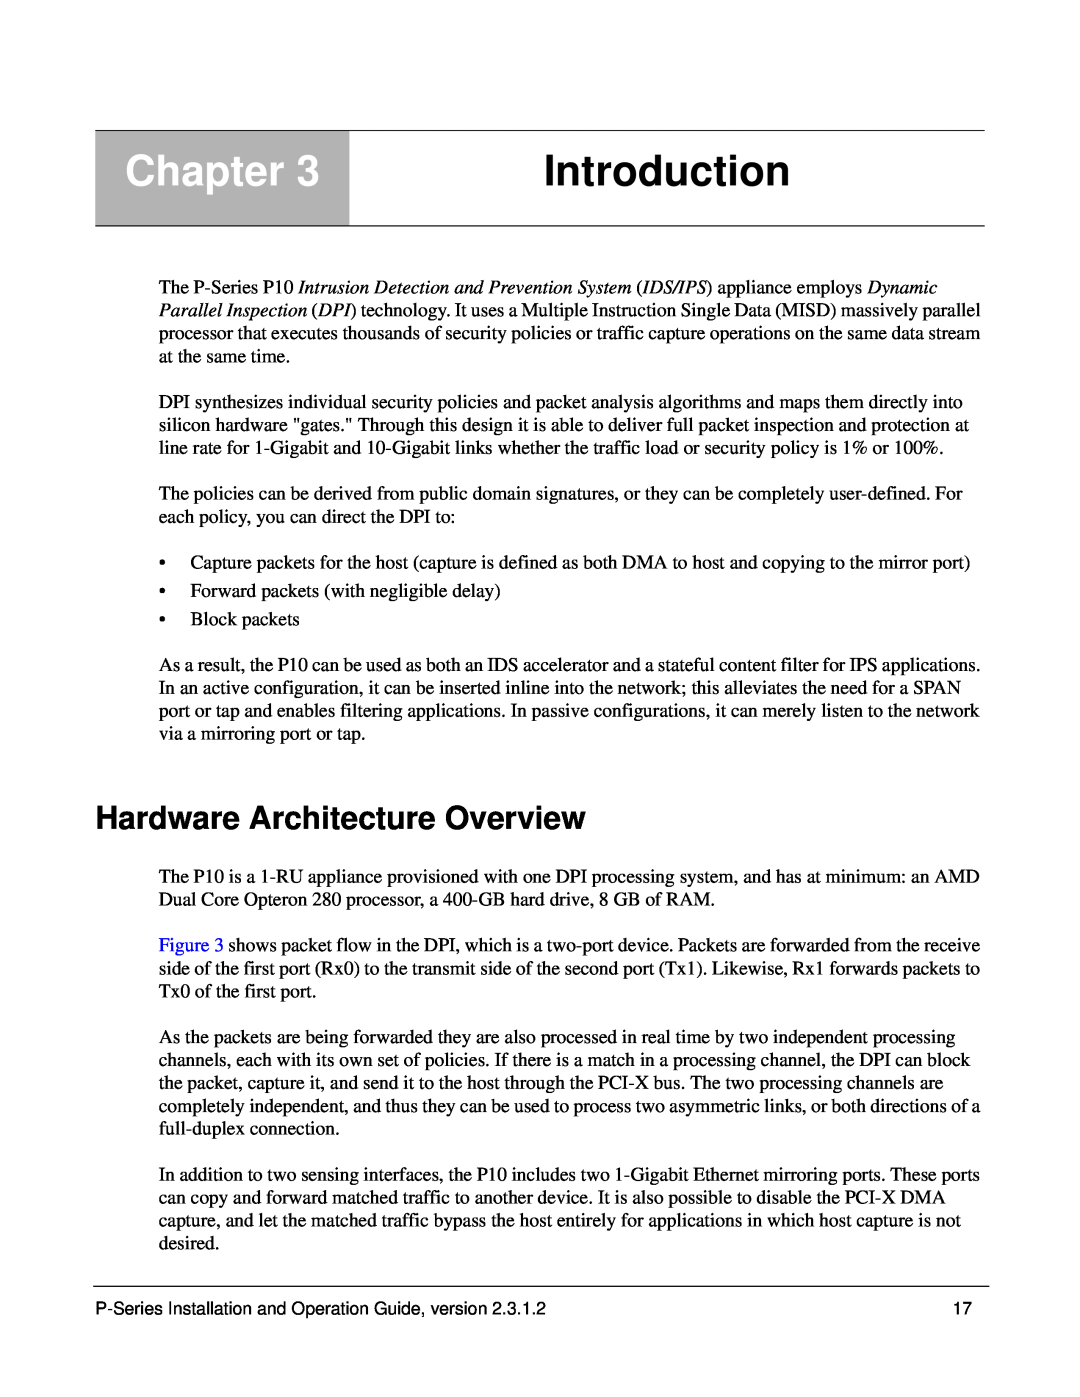 Force10 Networks 100-00055-01 manual Introduction, Hardware Architecture Overview, Chapter 